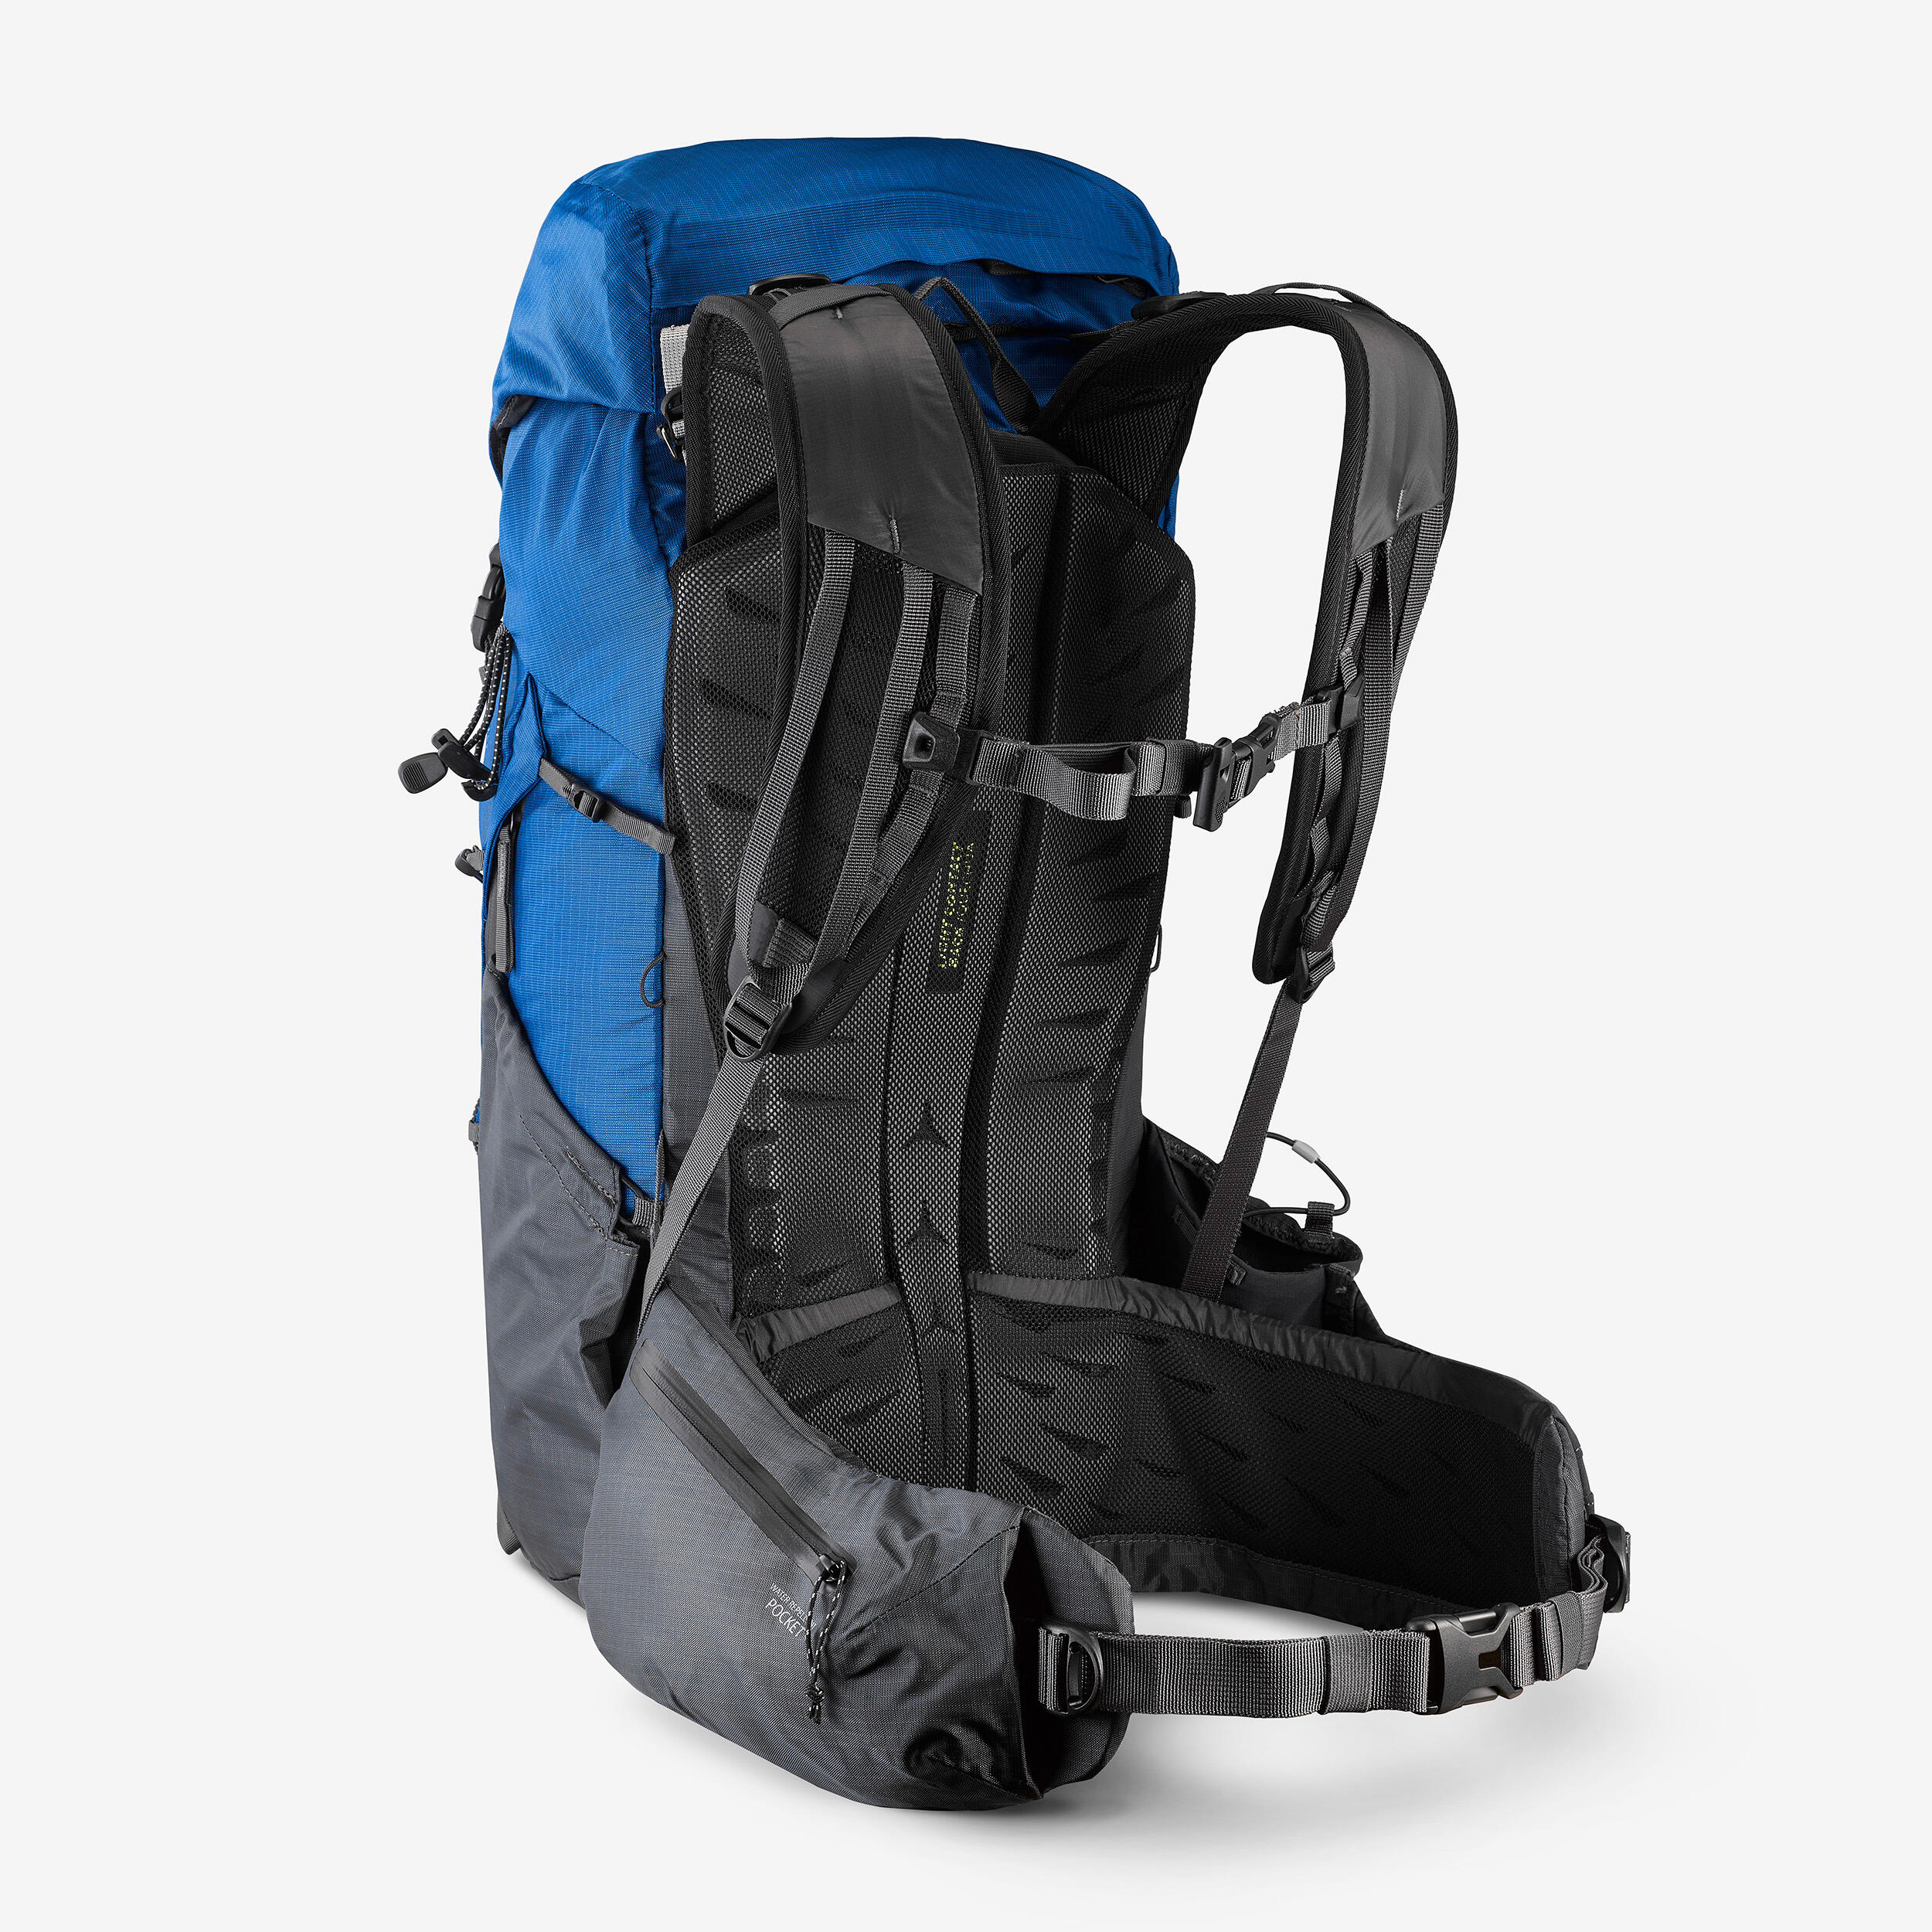 Mountain hiking backpack 25L - MH900 2/18